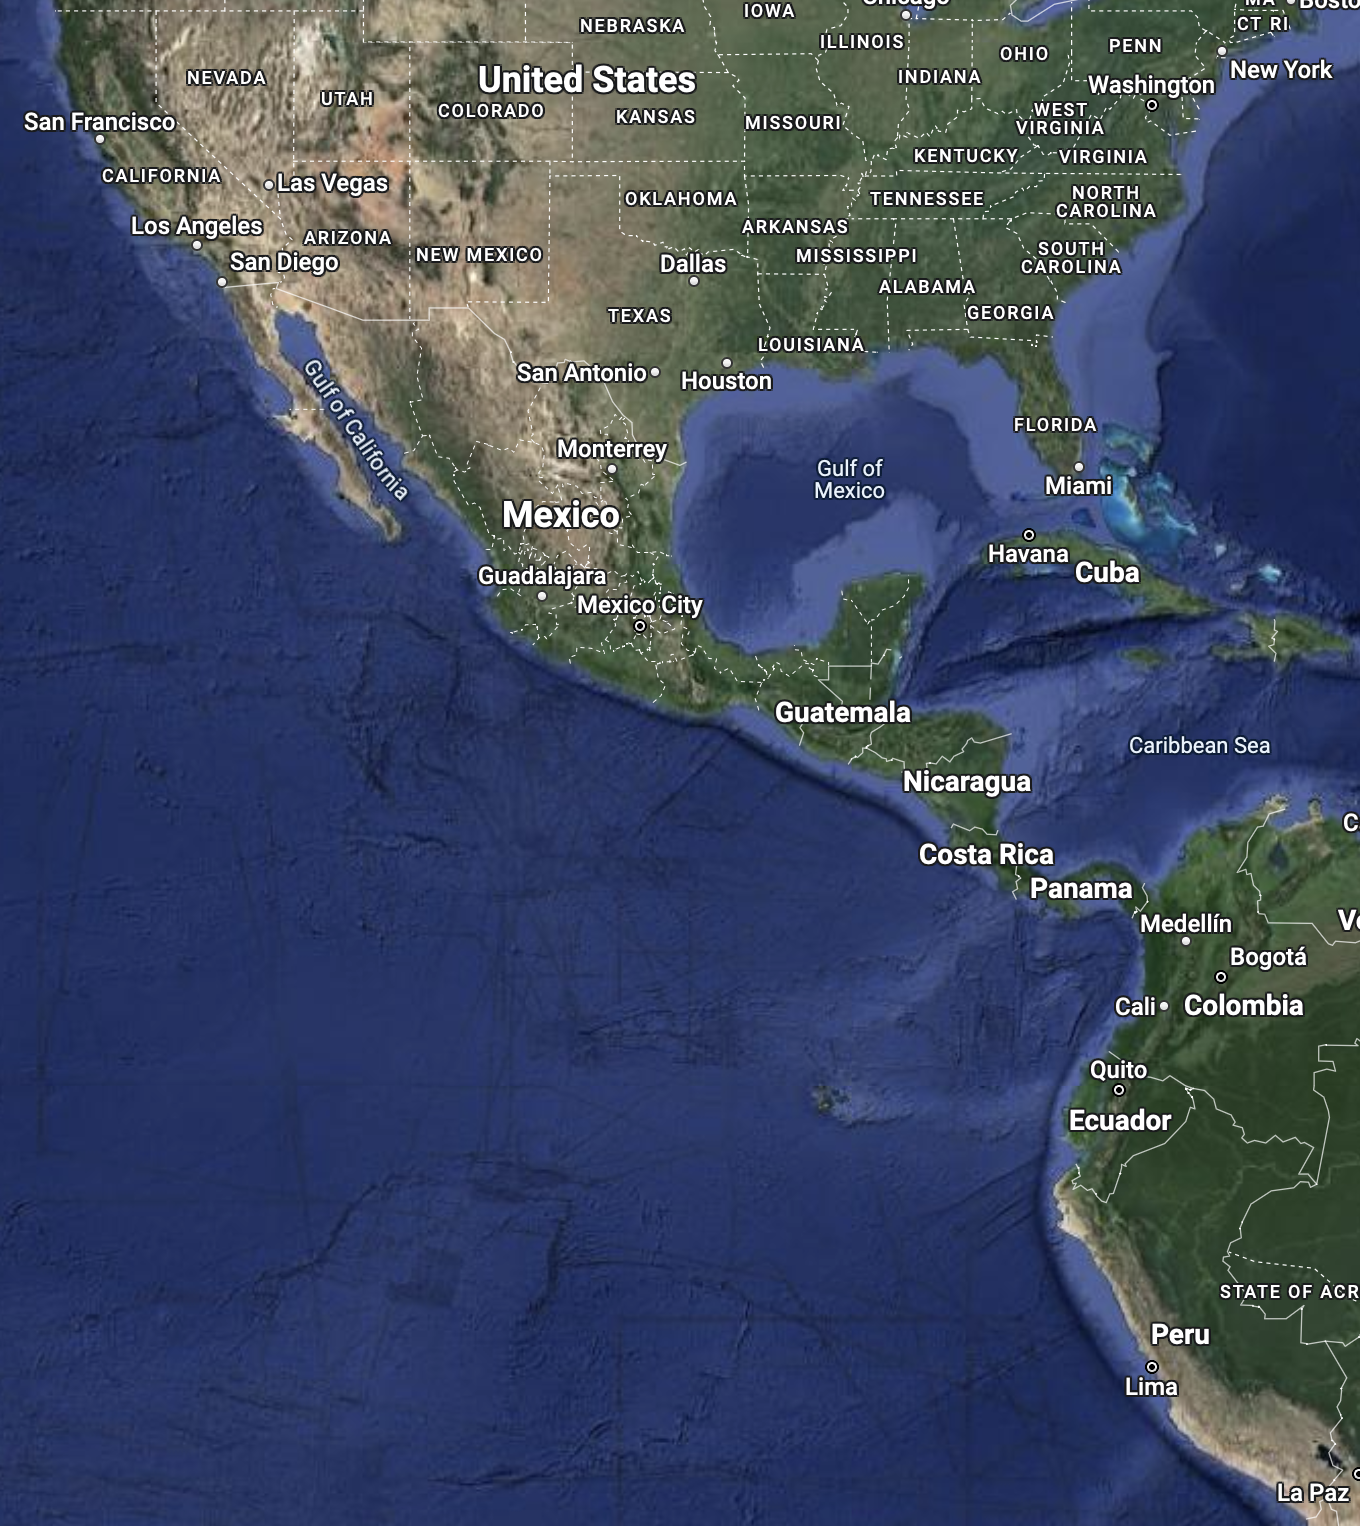 California 
and Peru in the web Mercator projection